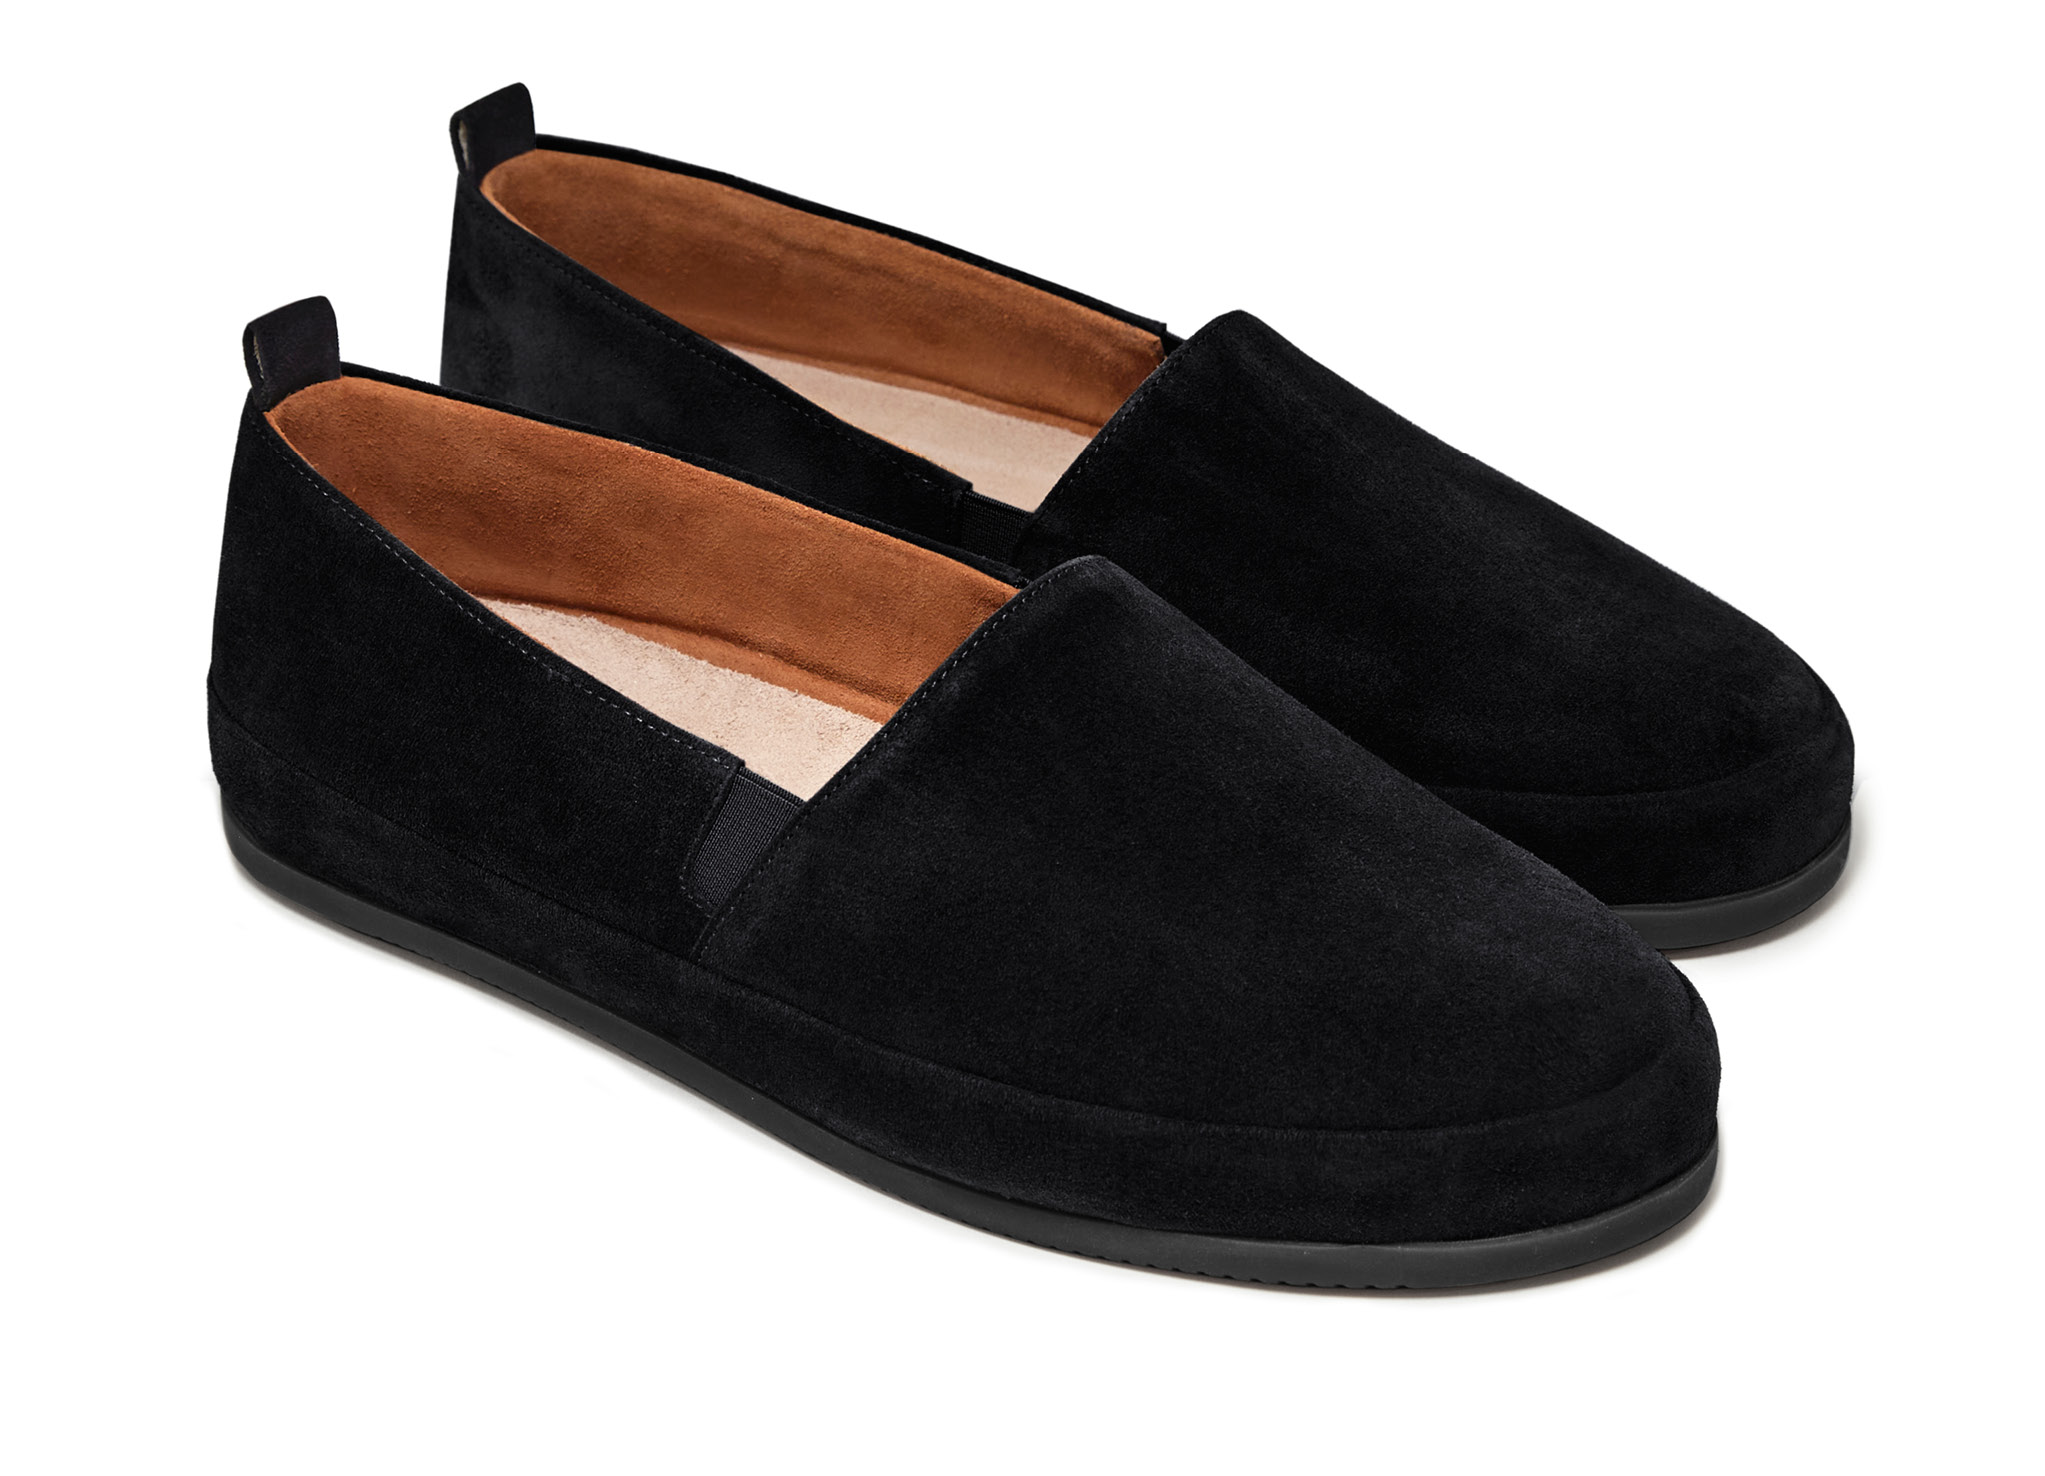 Loafer for Men | MULO shoes Luxurious Suede Leather